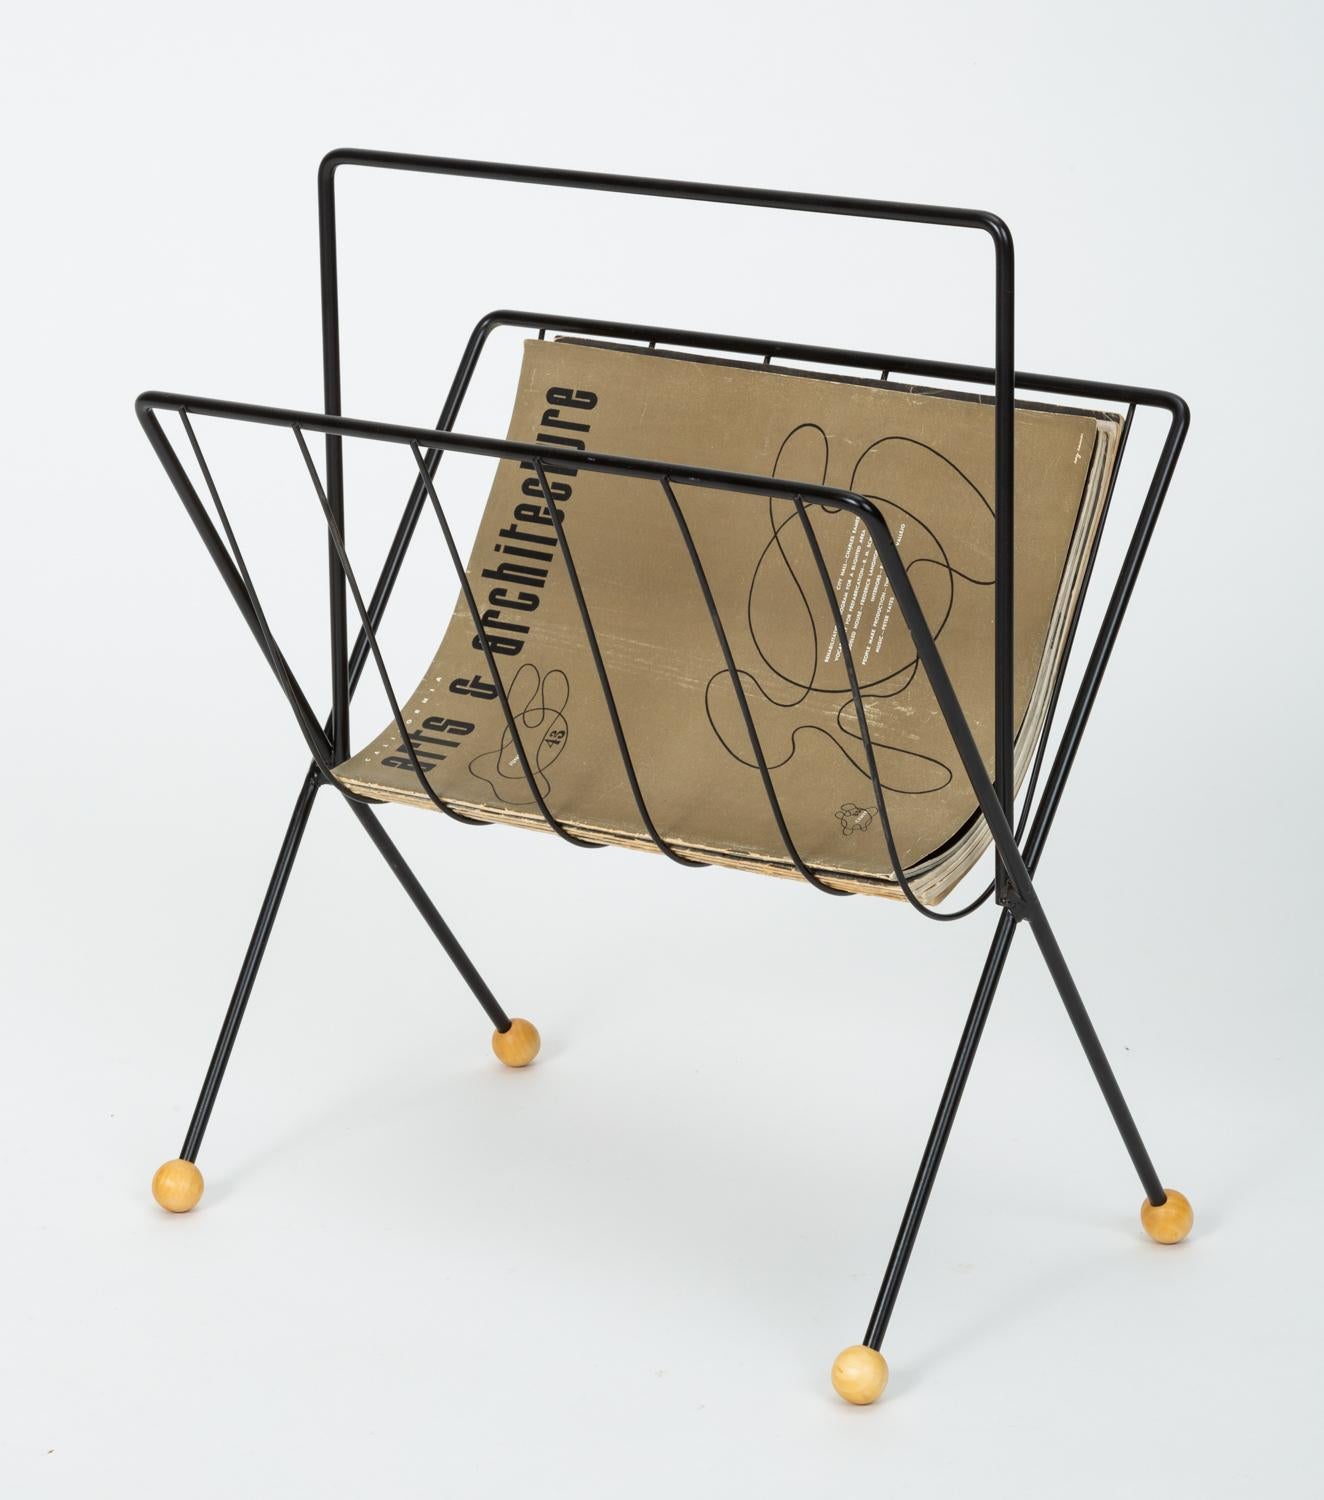 American made wire magazine rack by New York-based designer Tony Paul. The rack has a skeletal frame with bent spokes to hold your items and crossed legs finished with wooden ball glides. The piece has been powder-coated for a glossy black